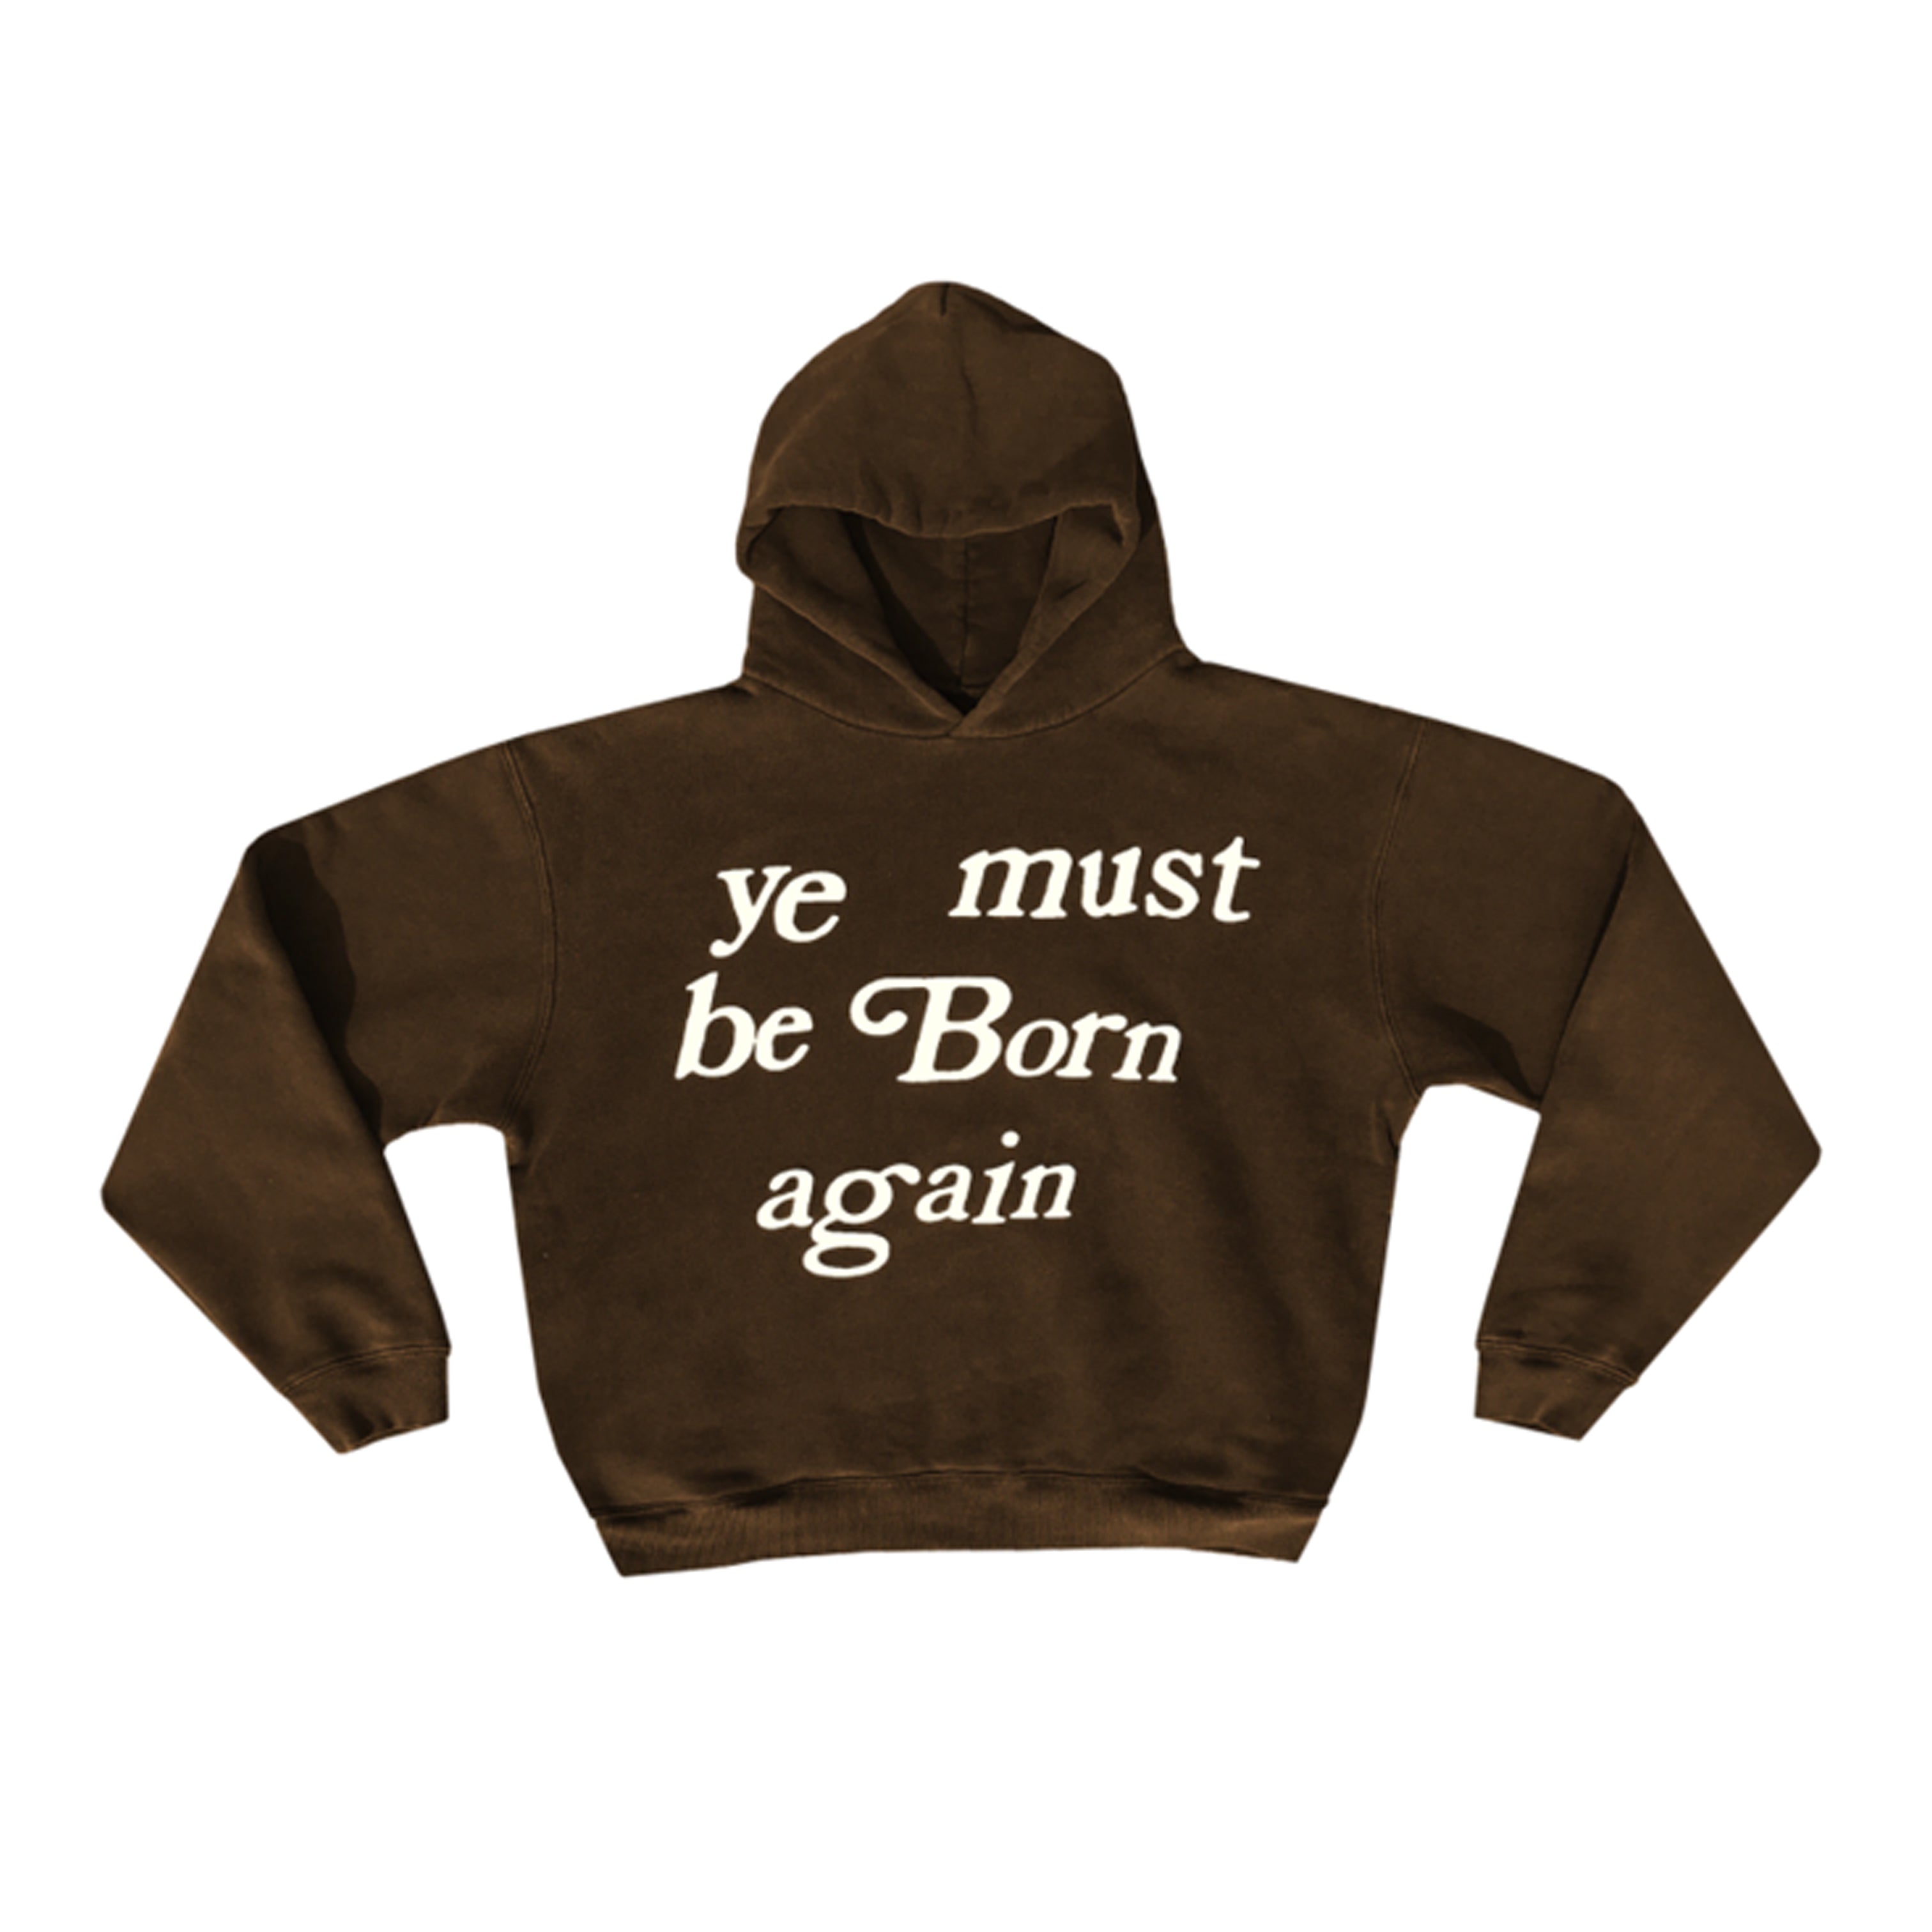 CPFM Hoodie "YE MUST BE BORN AGAIN" Brown New Size S